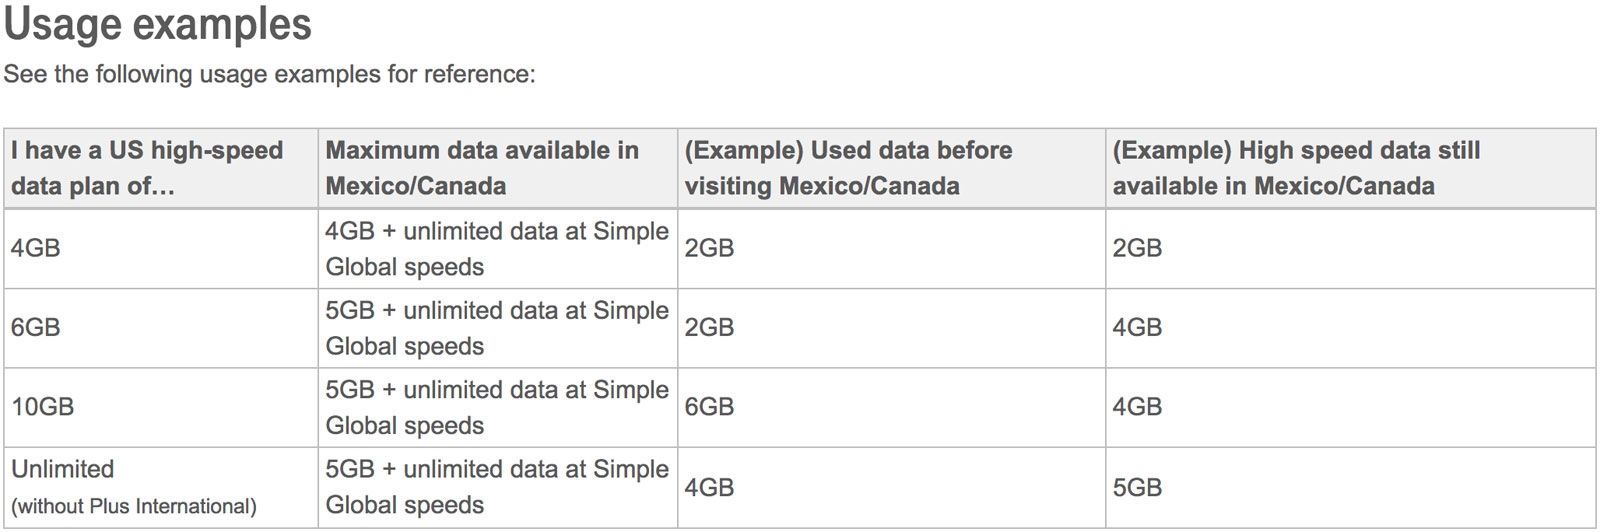 T-Mobile puts 5GB cap on high-speed data in Canada and Mexico | DeviceDaily.com